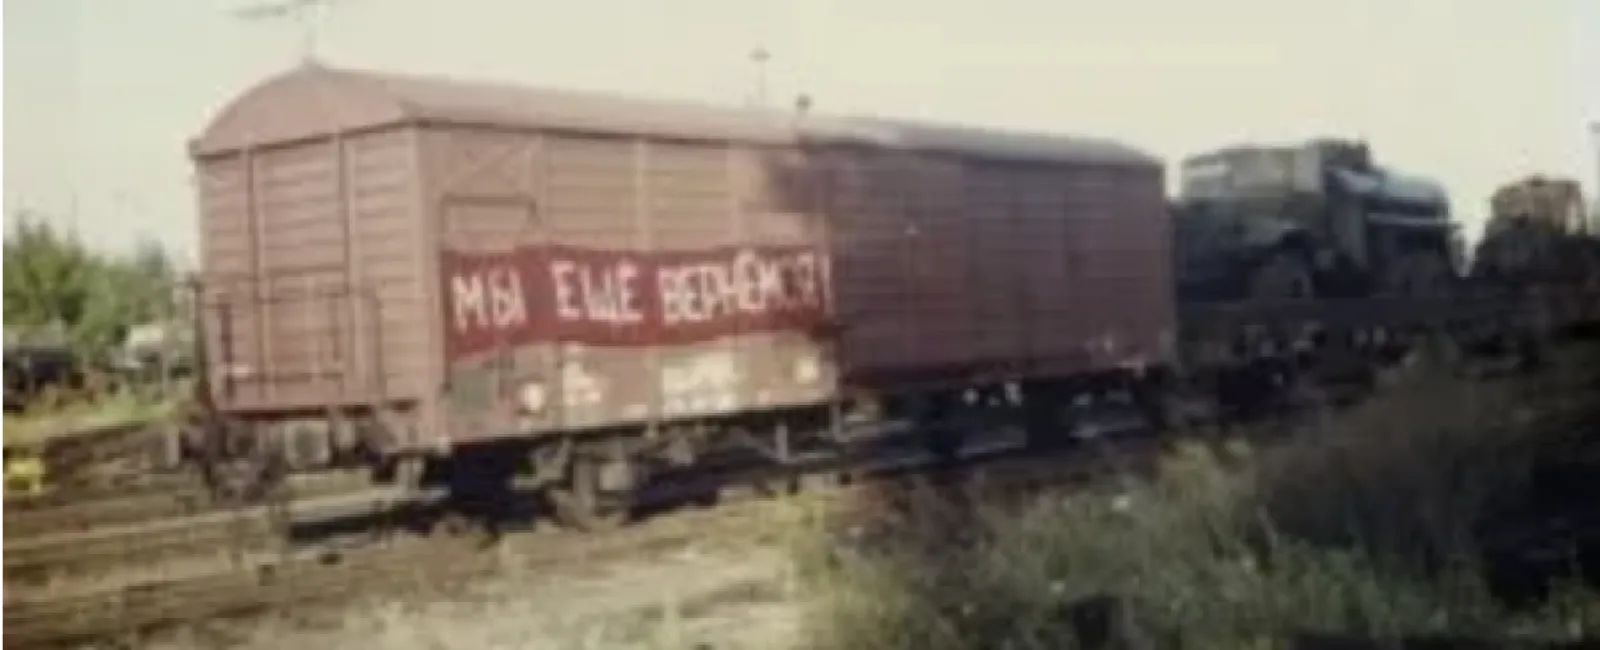 Banner on the last Russian military train leaving East Germany in the 90s reads: “We will be back”